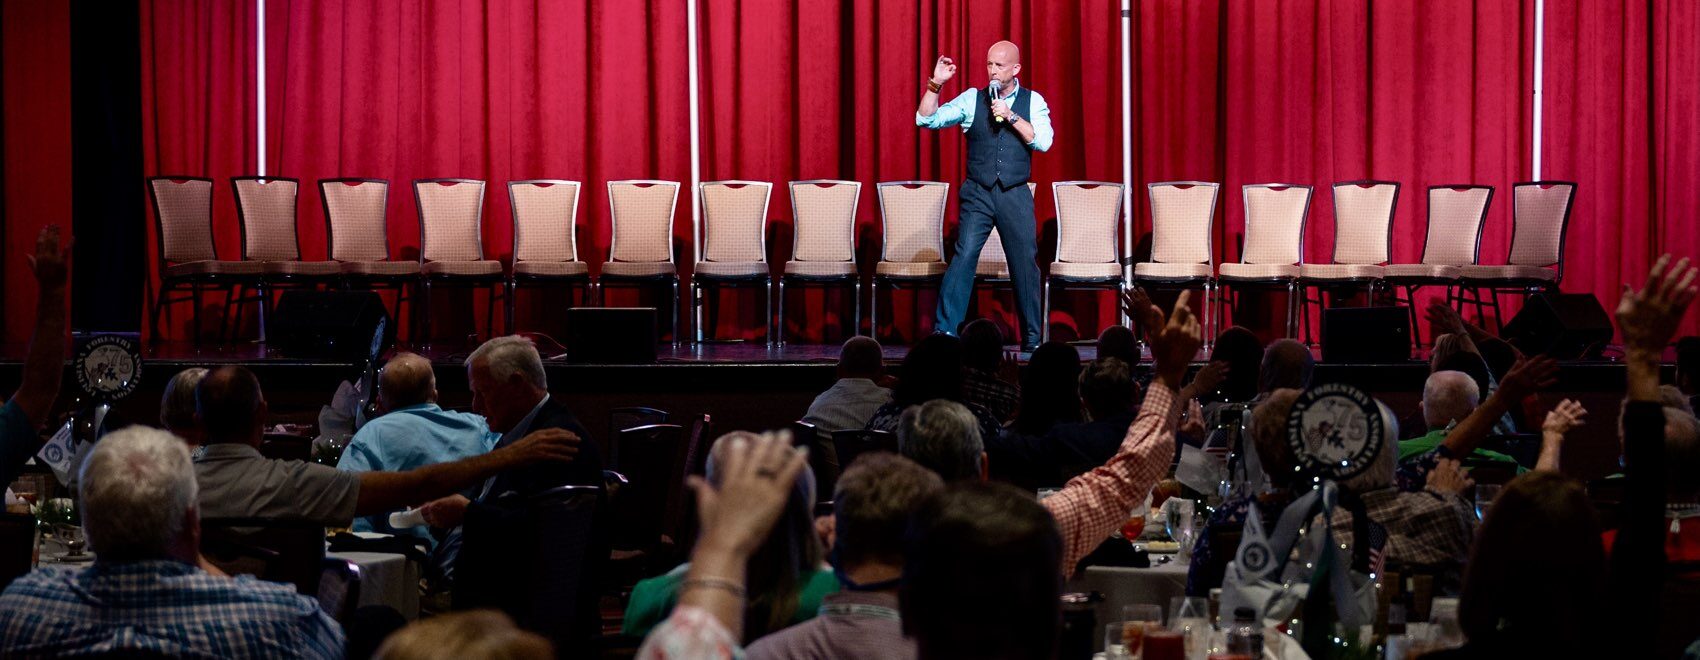 Corporate entertainment hypnosis show. Stage Hypnotist Erick Kand on stage in front of a corporate audience.